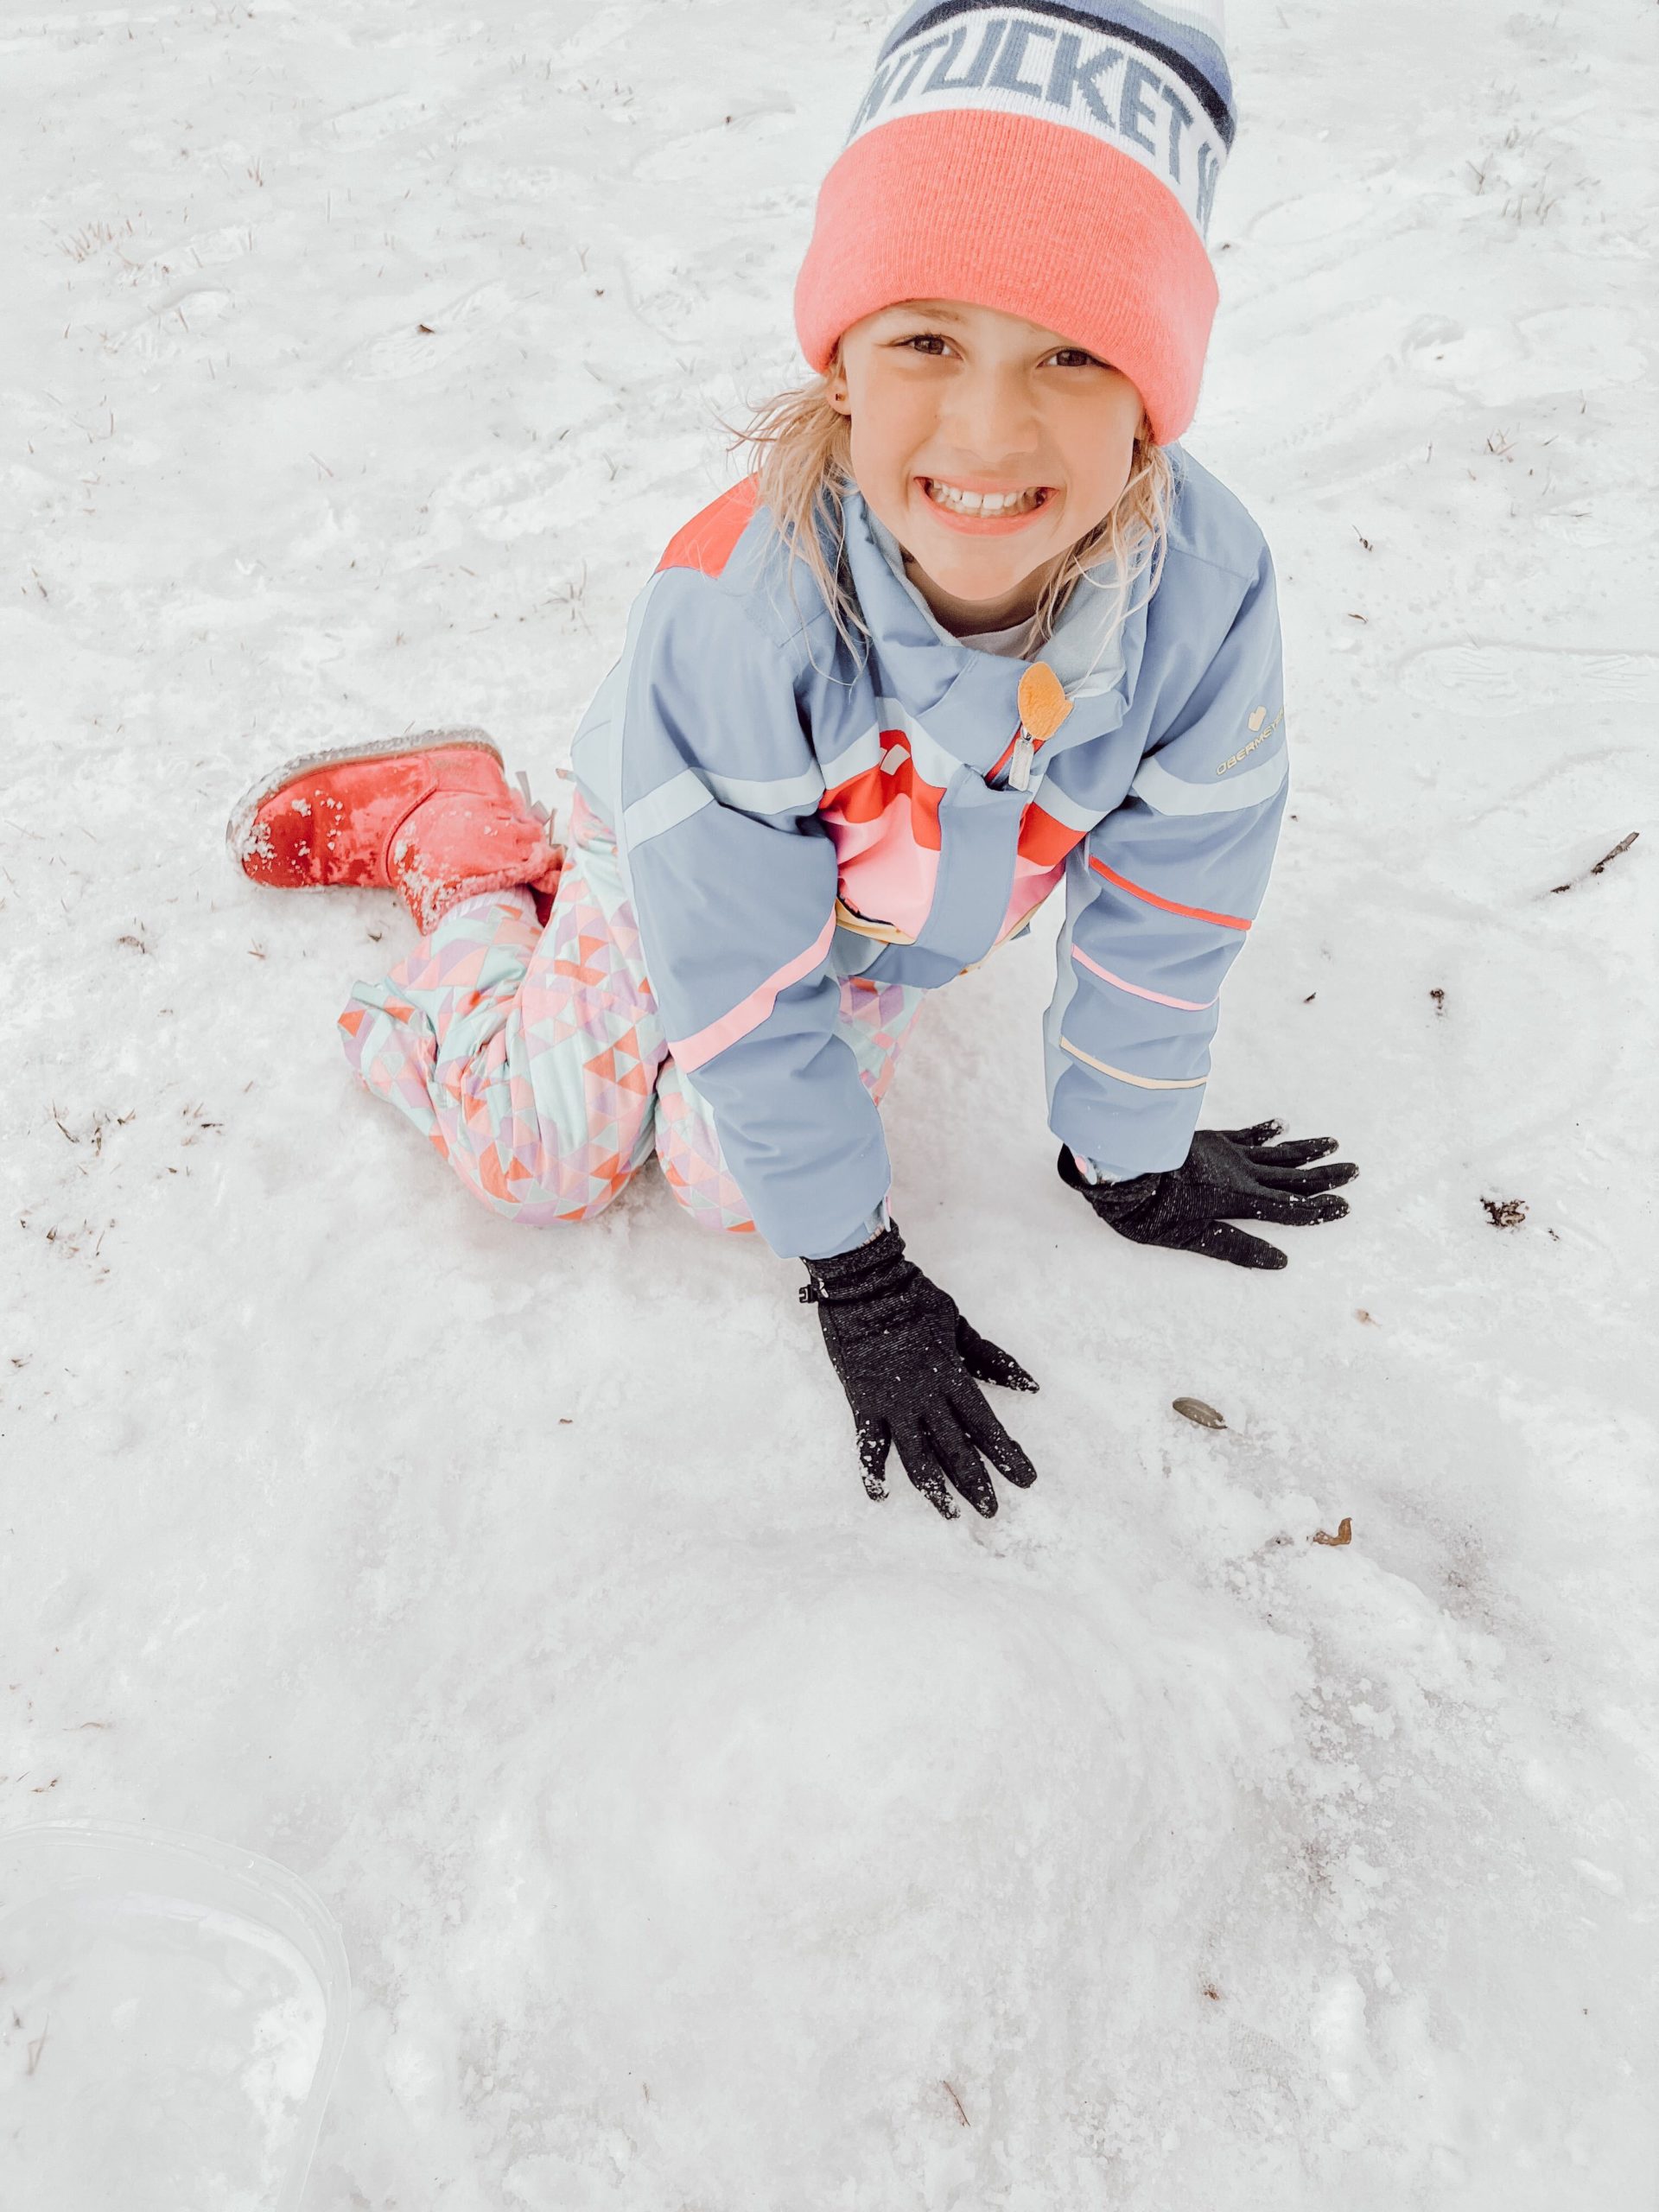 snow day activities for kids